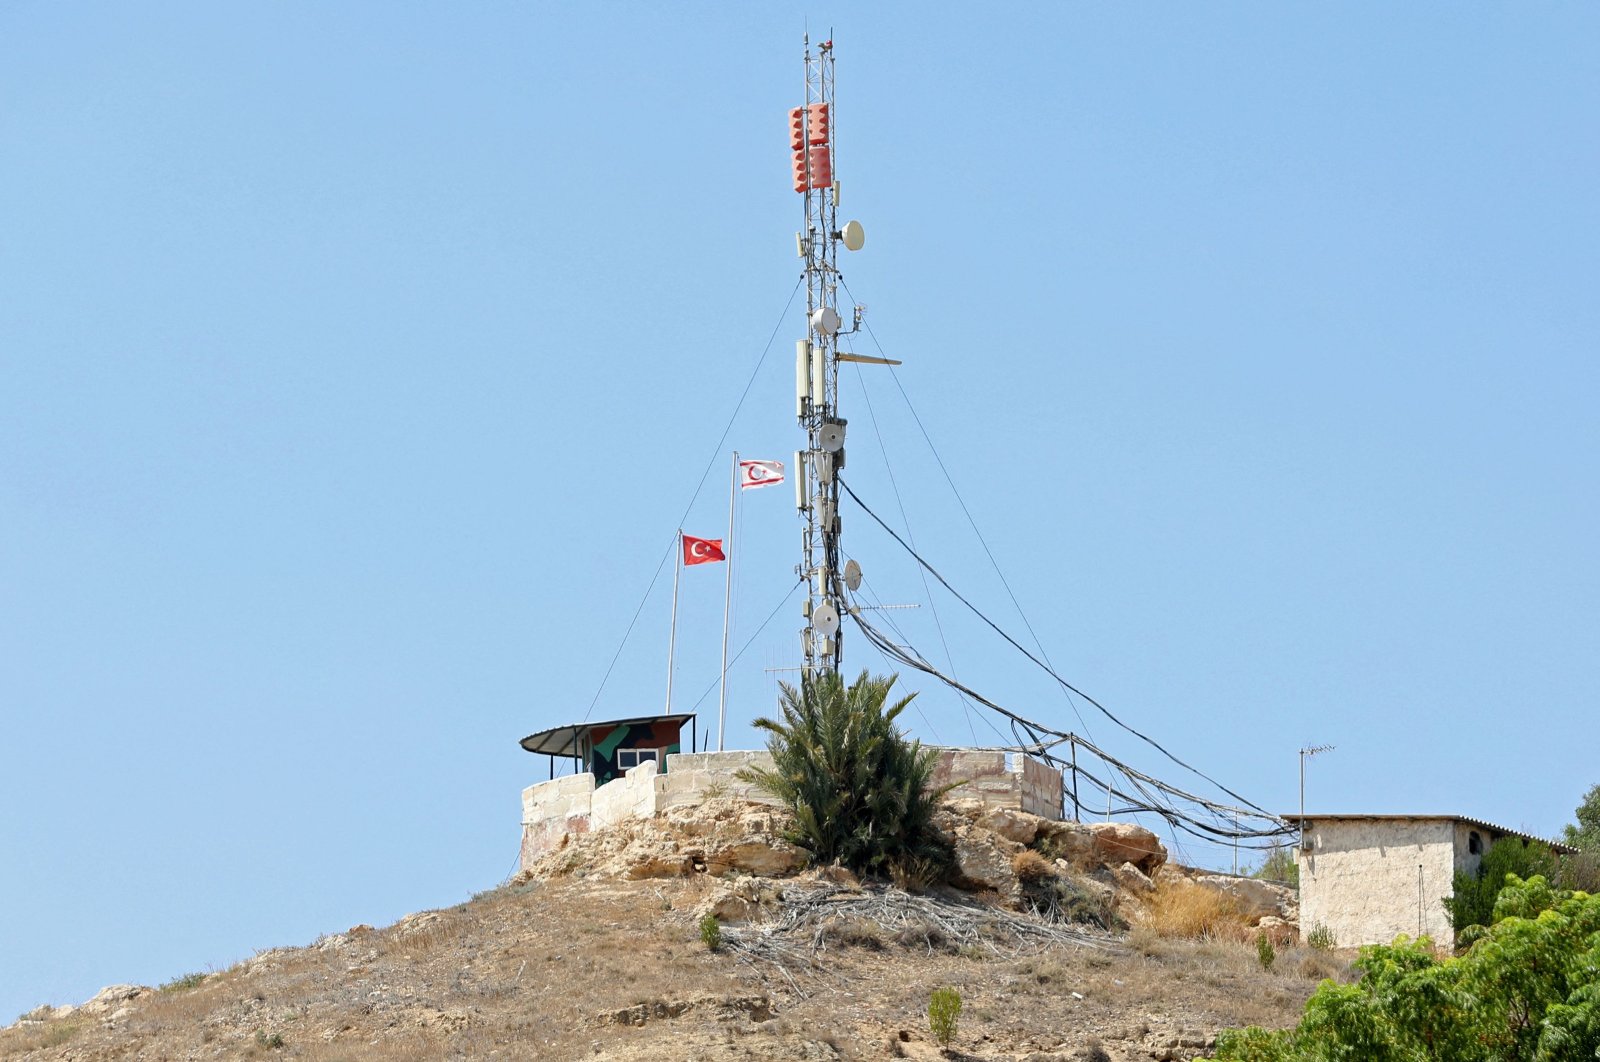 Turkish and Turkish Republic of Northern Cyprus (TRNC) flags flutter in Pile village, which lies between the Greek Cypriot administration in the south and the TRNC in the north, Aug. 20, 2023. (AFP Photo)